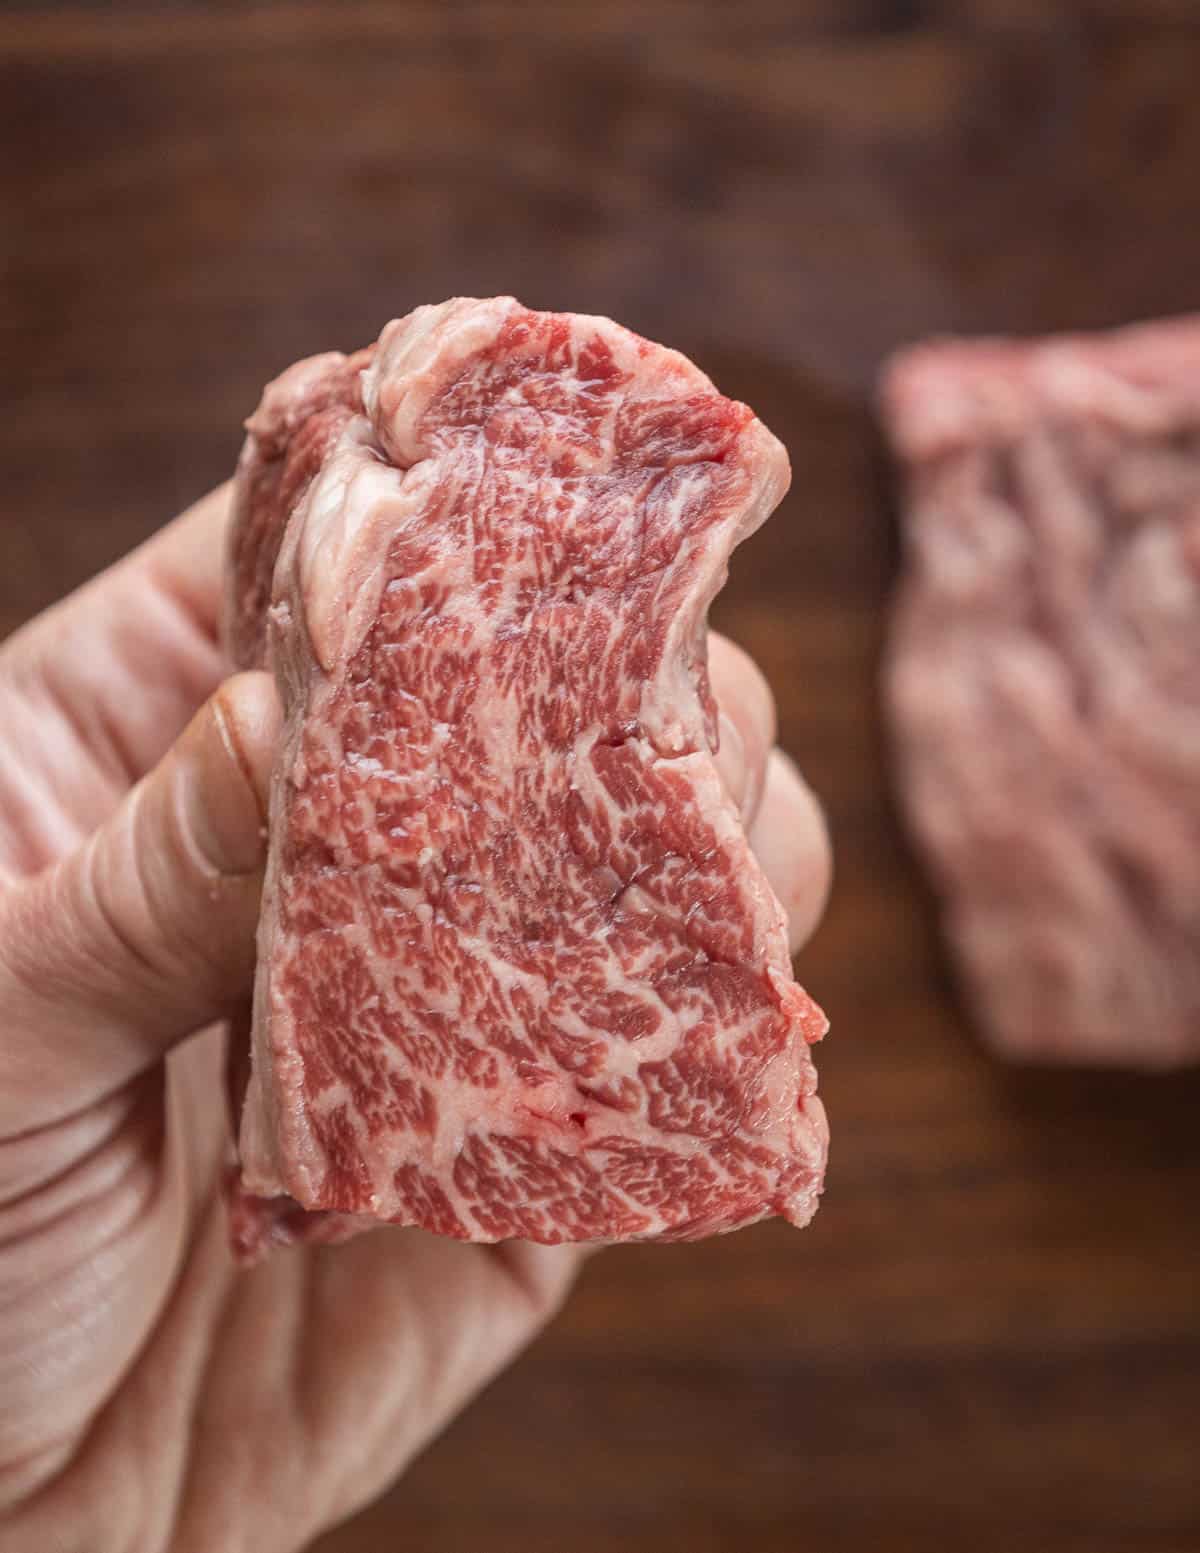 A hand holding a wagyu bavette steak showing marbling.